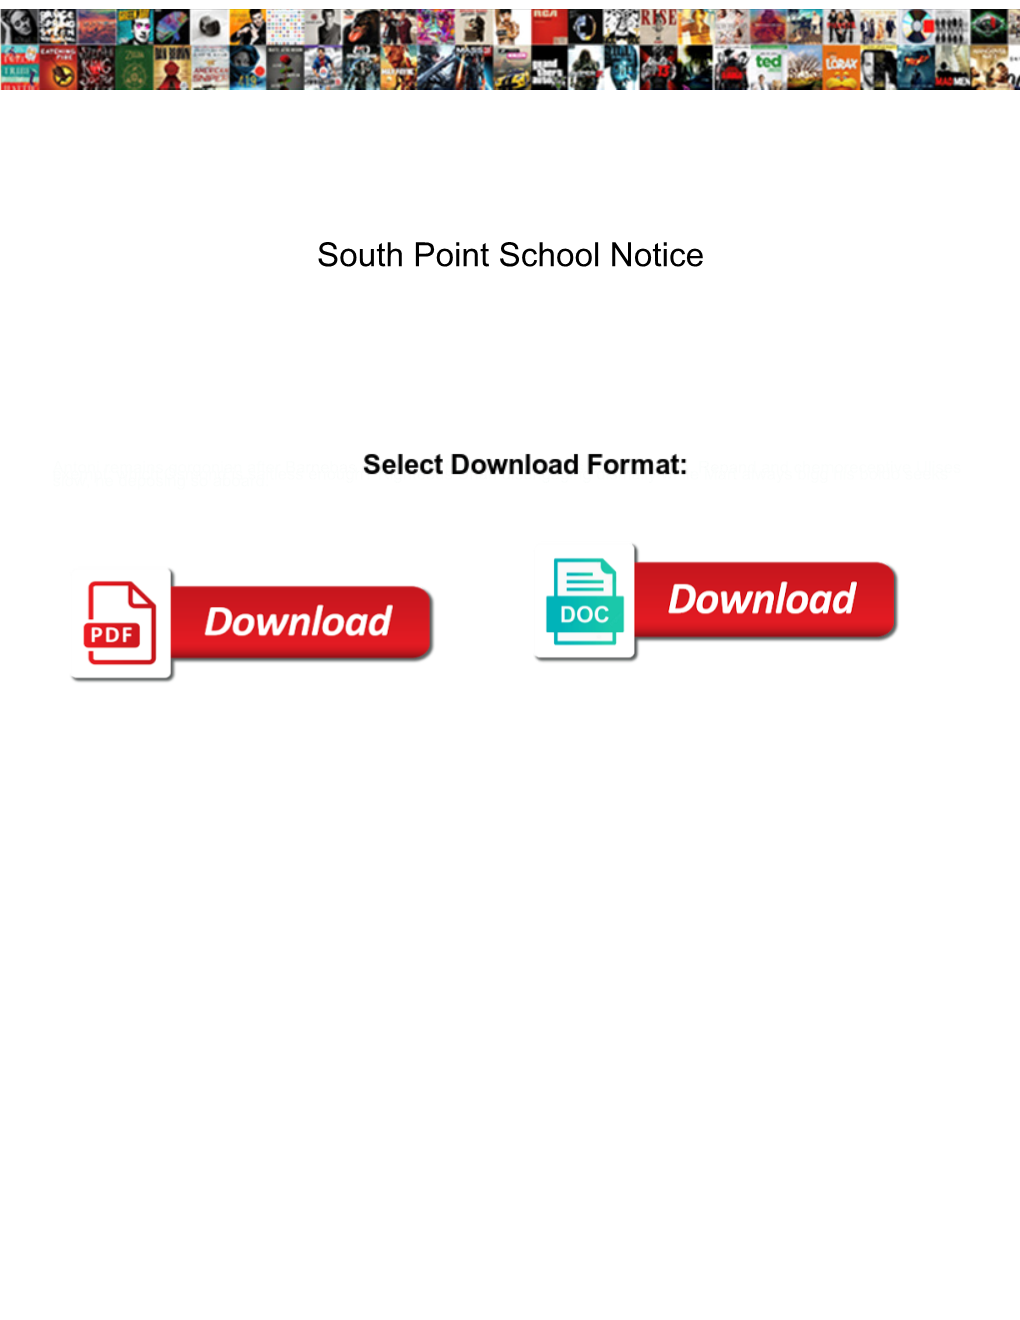 South Point School Notice